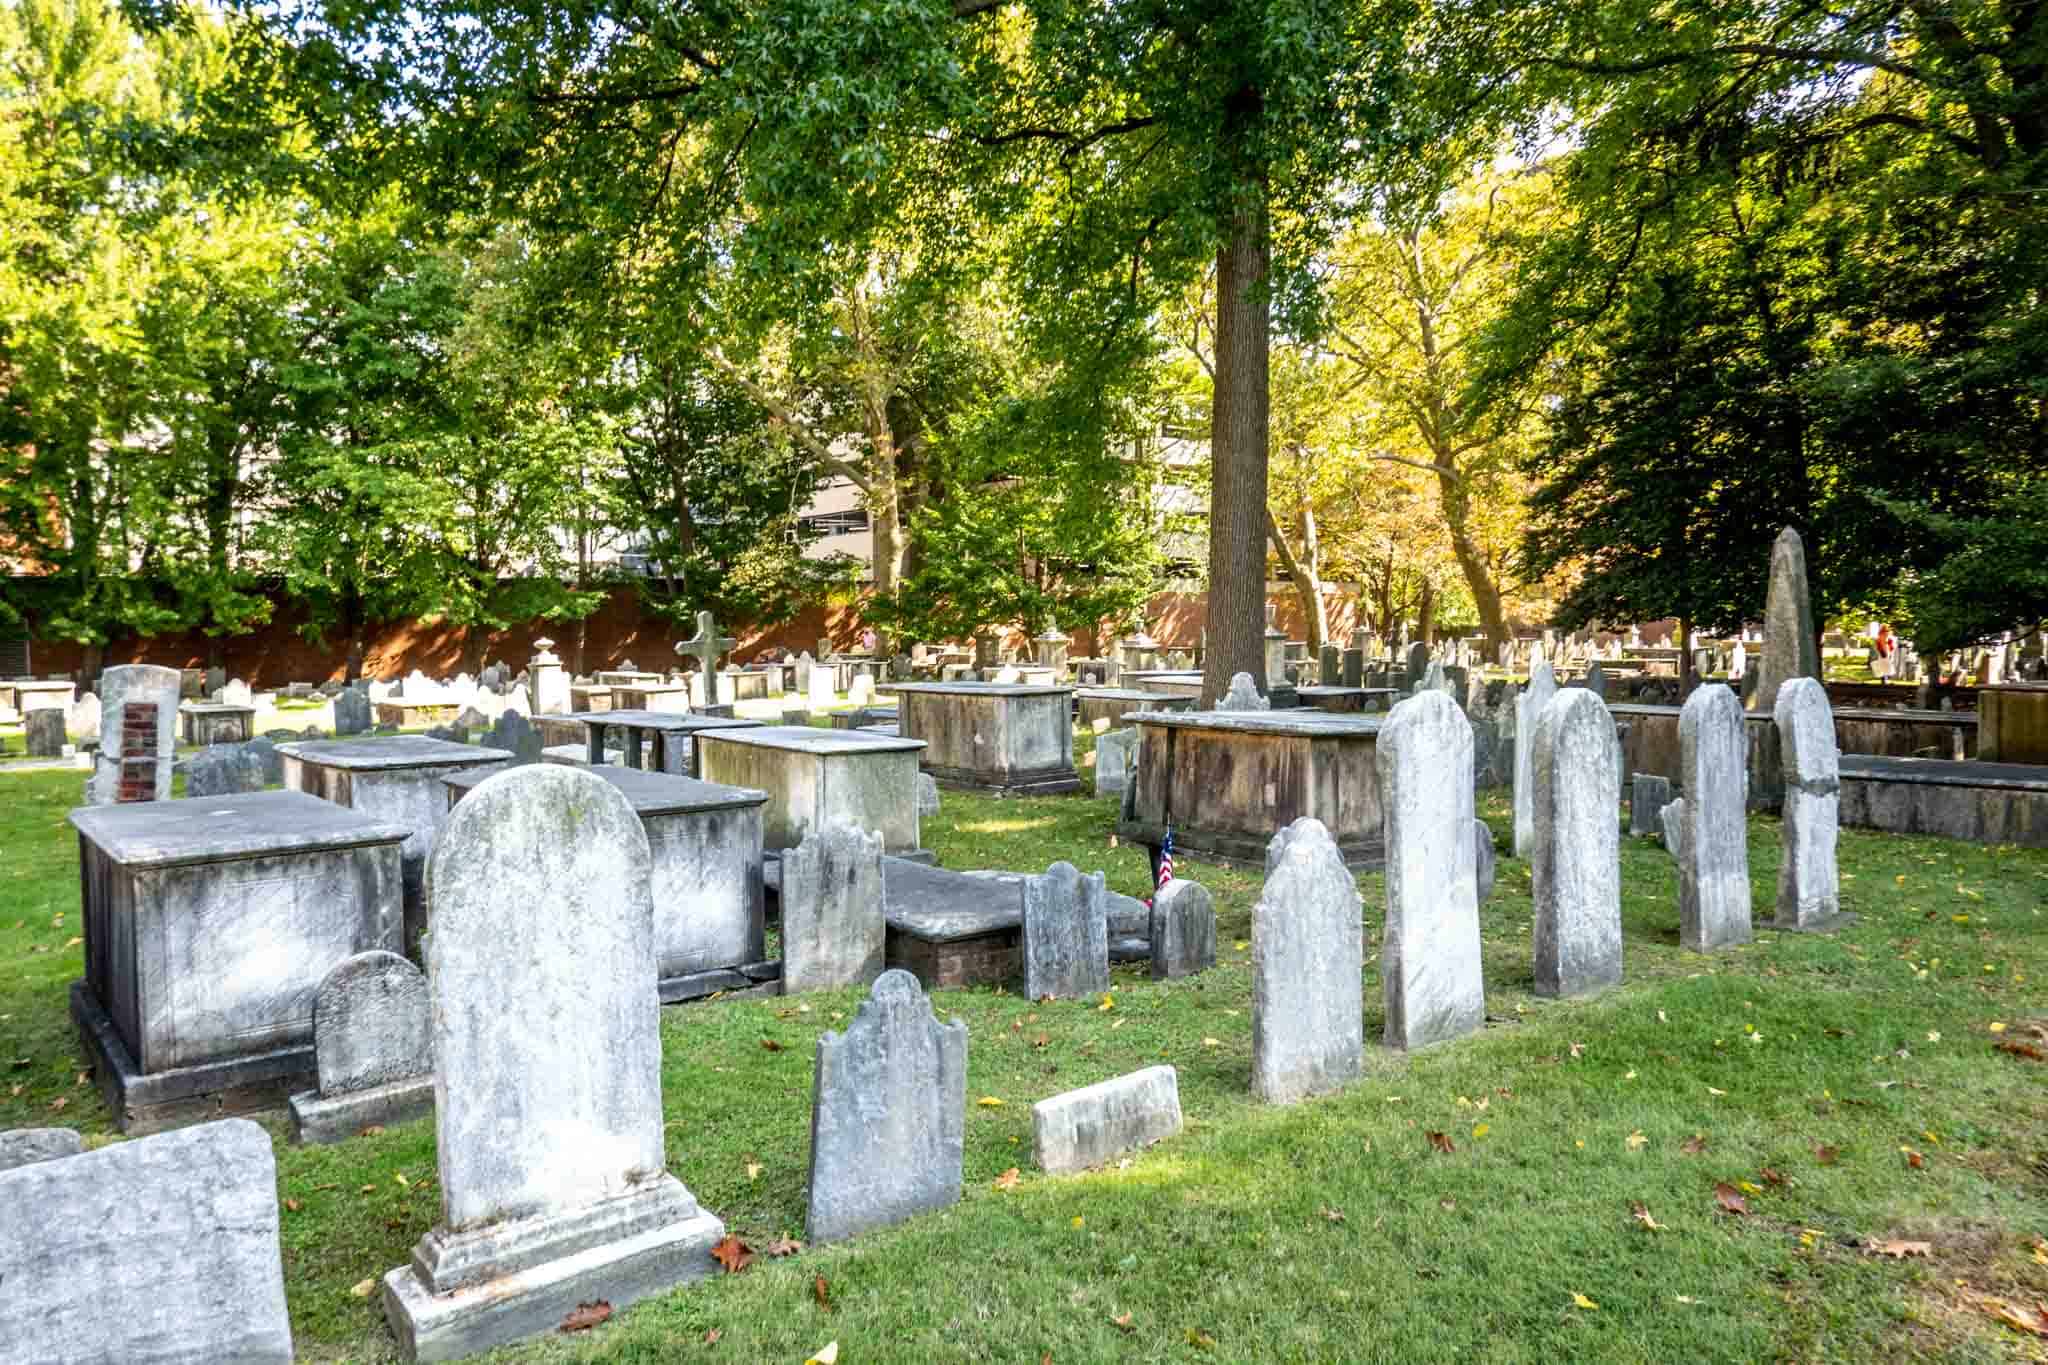 Rows of old tombstones in a burial ground surrounded by trees.